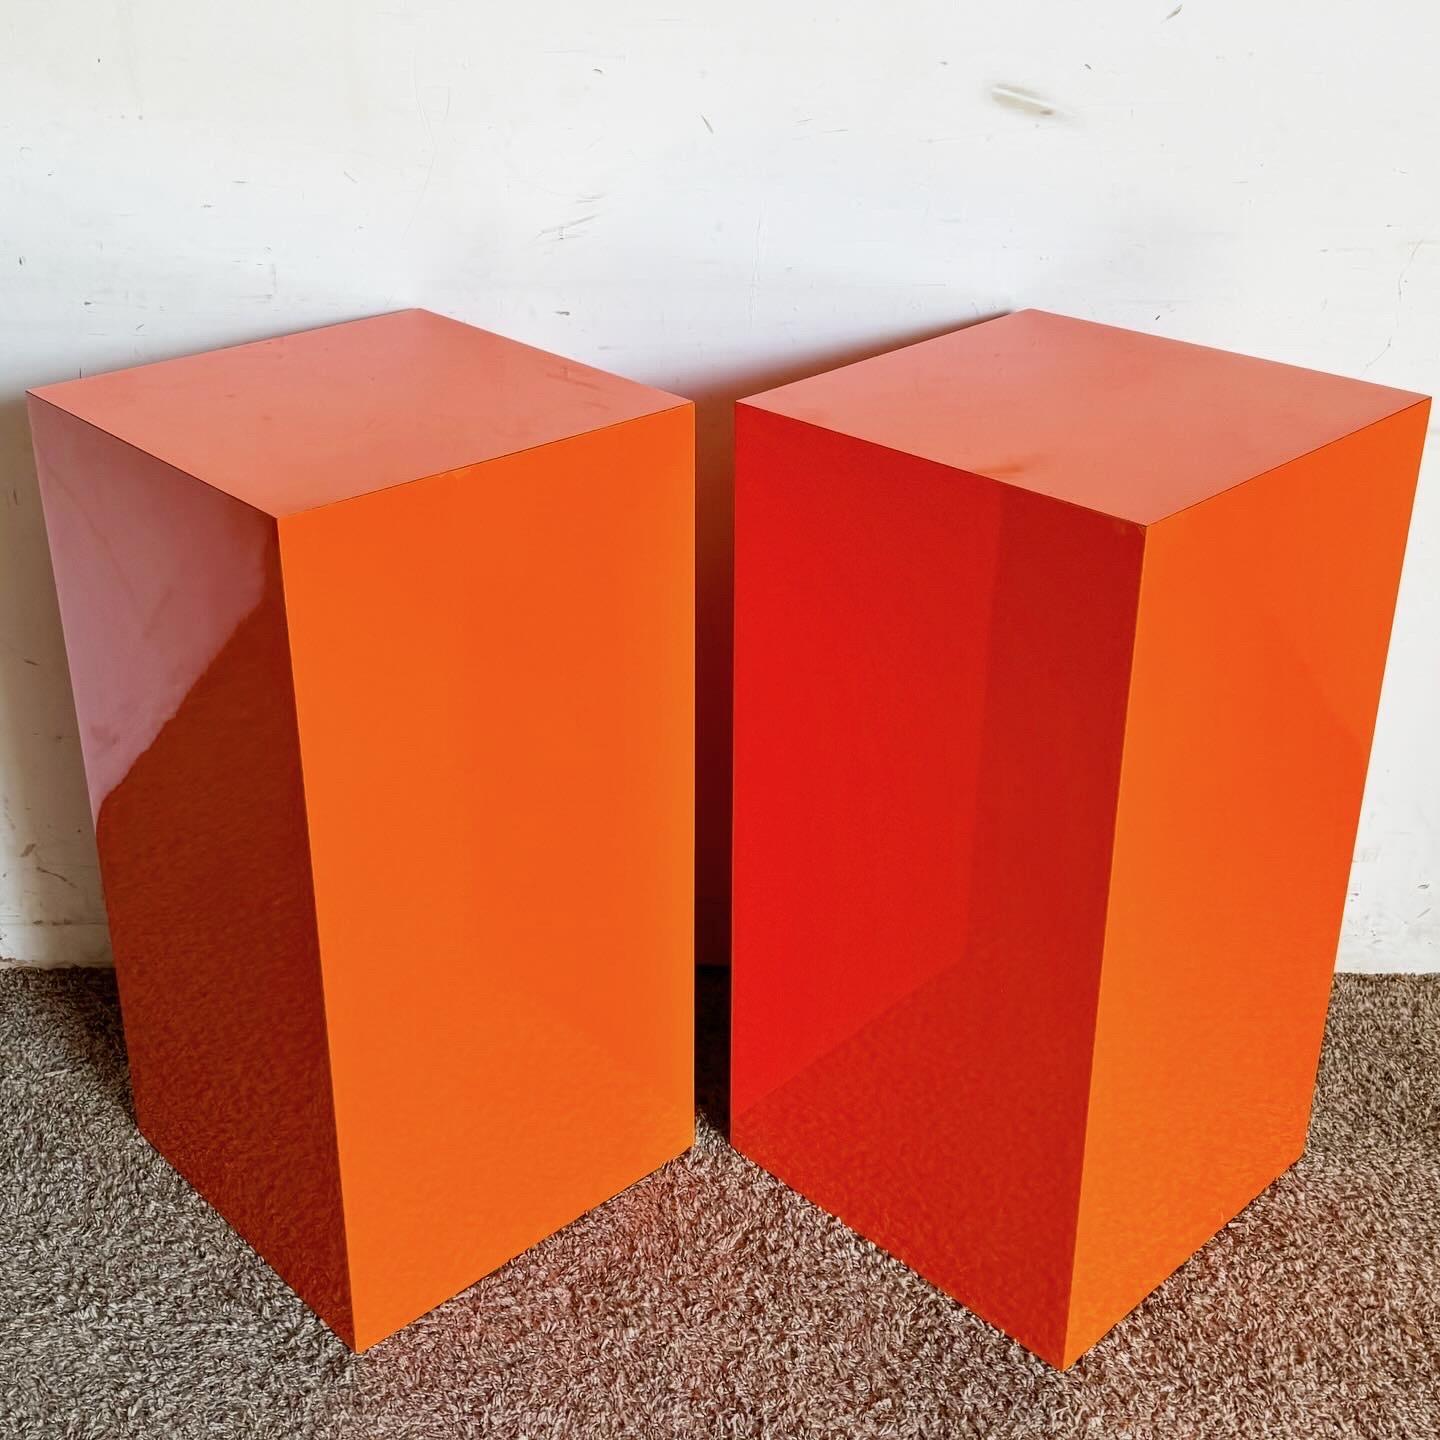 Postmodern Orange Lacquer Laminate Rectangular Prism Pedestals - a Pair In Good Condition For Sale In Delray Beach, FL